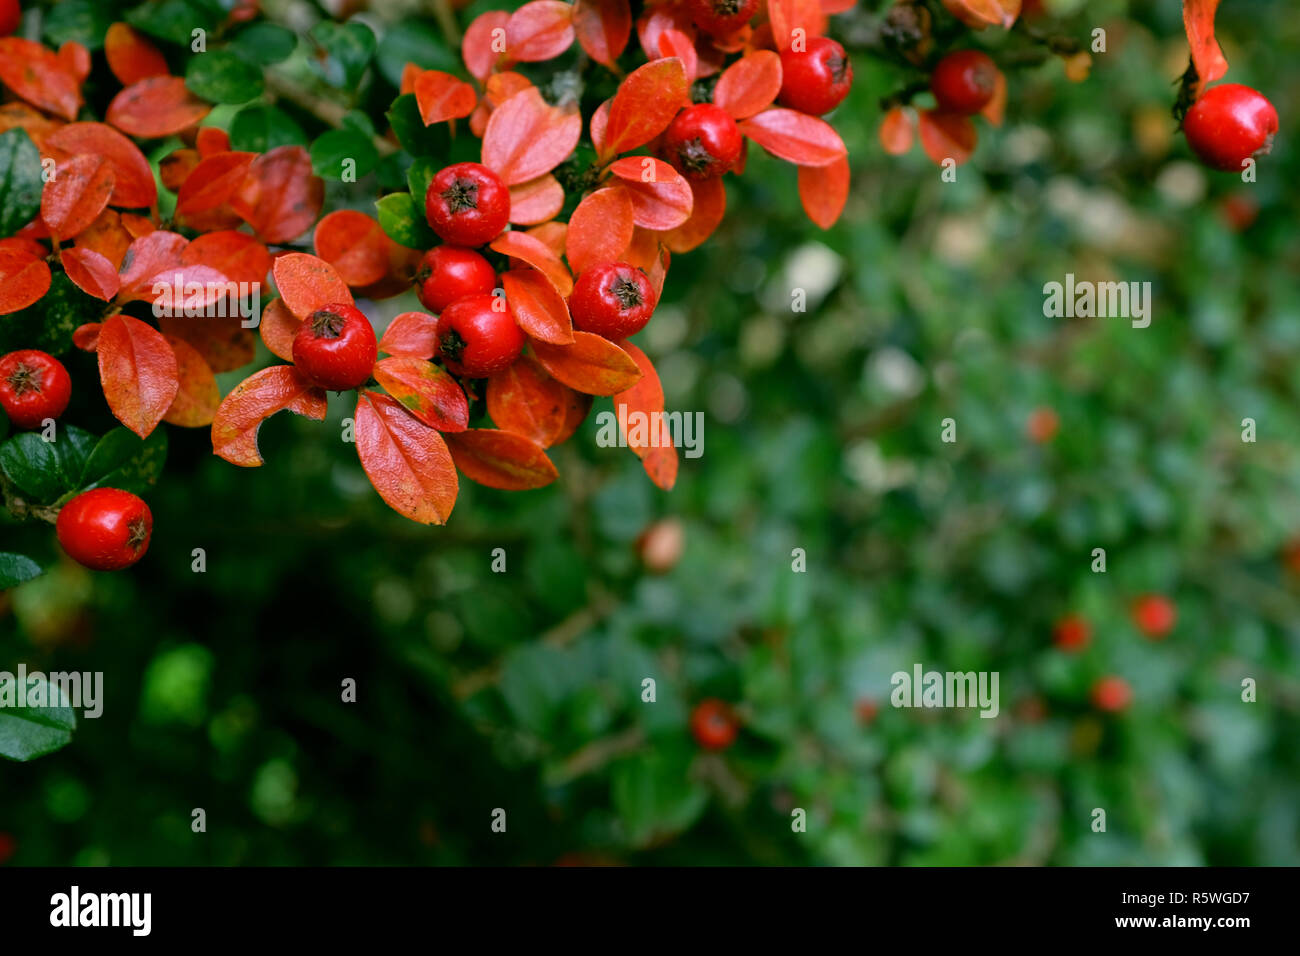 Red cotoneaster berries on a patch of autumn leaves Stock Photo